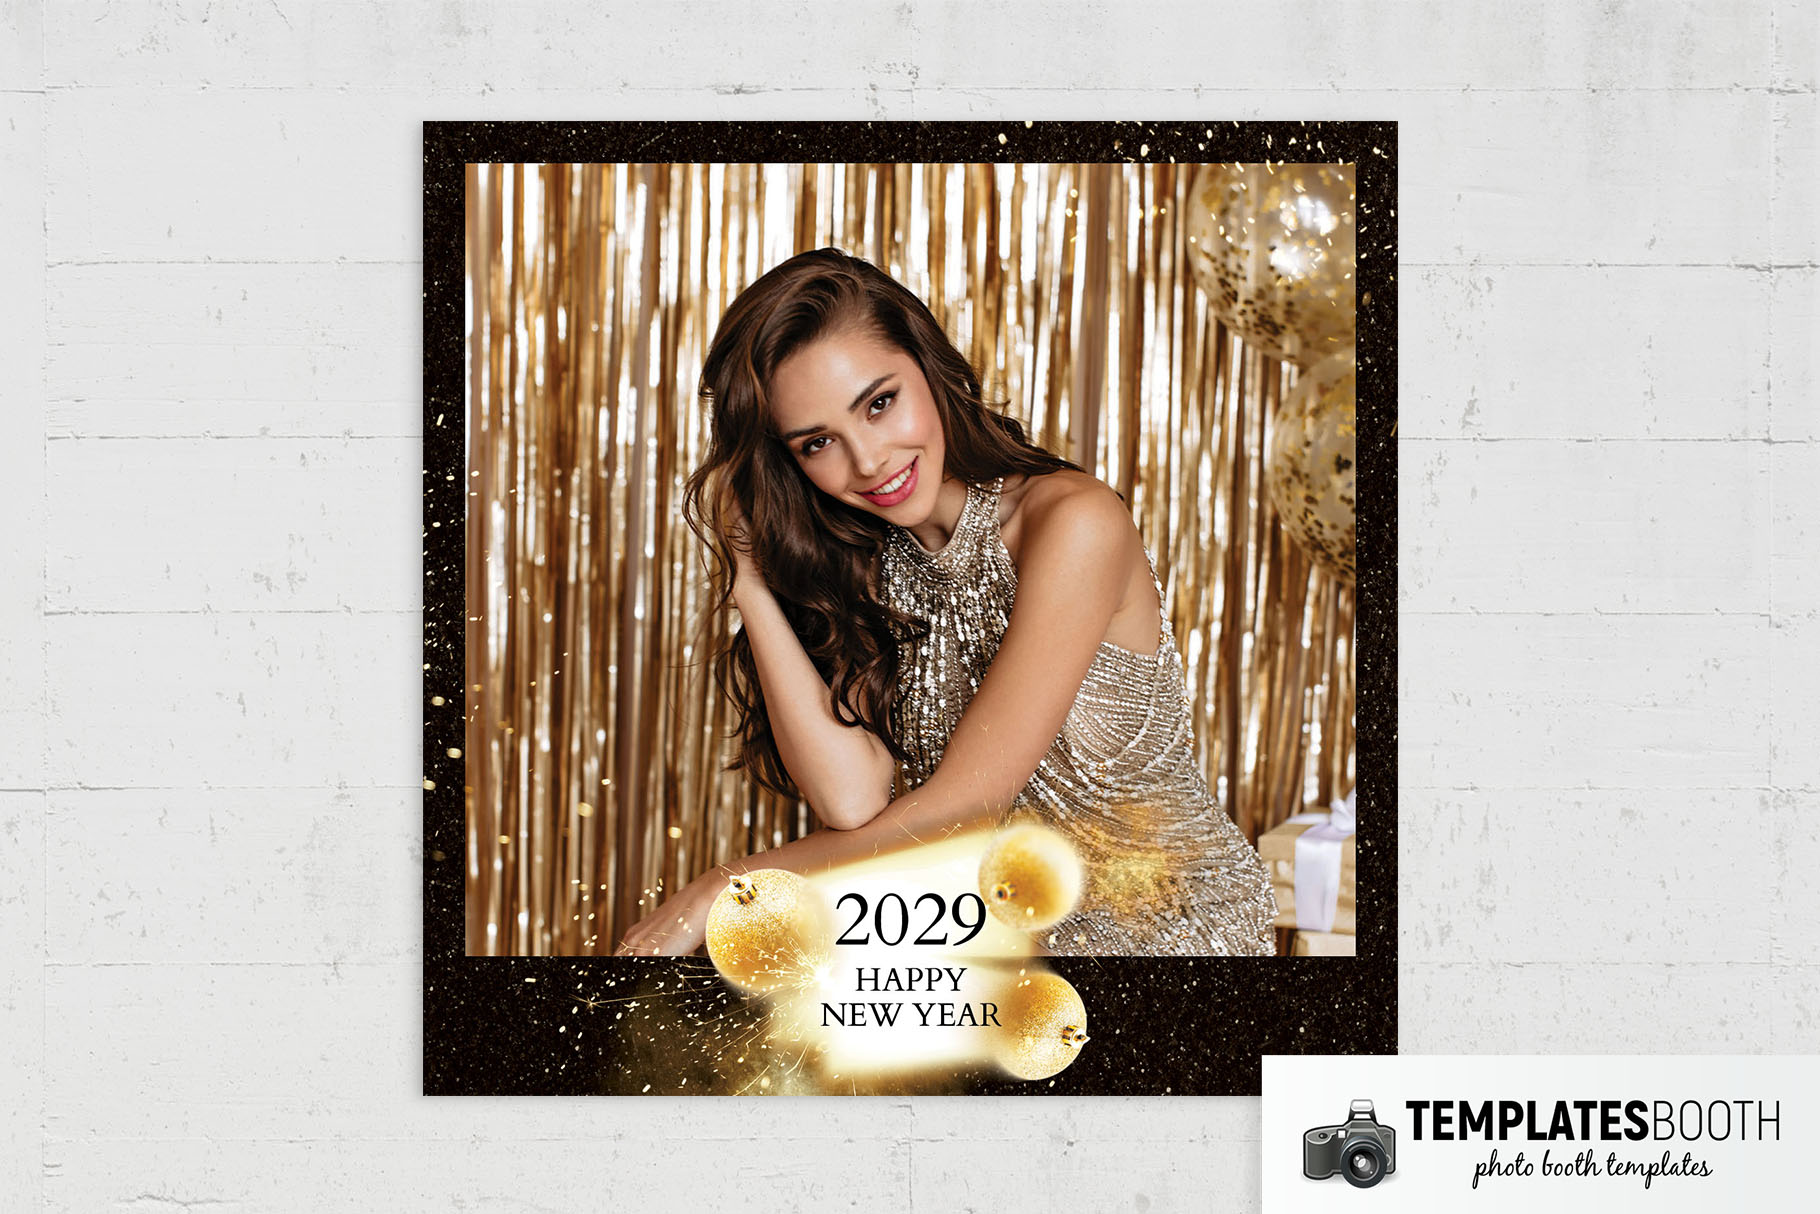 Black & Gold NYE Photo Booth Template